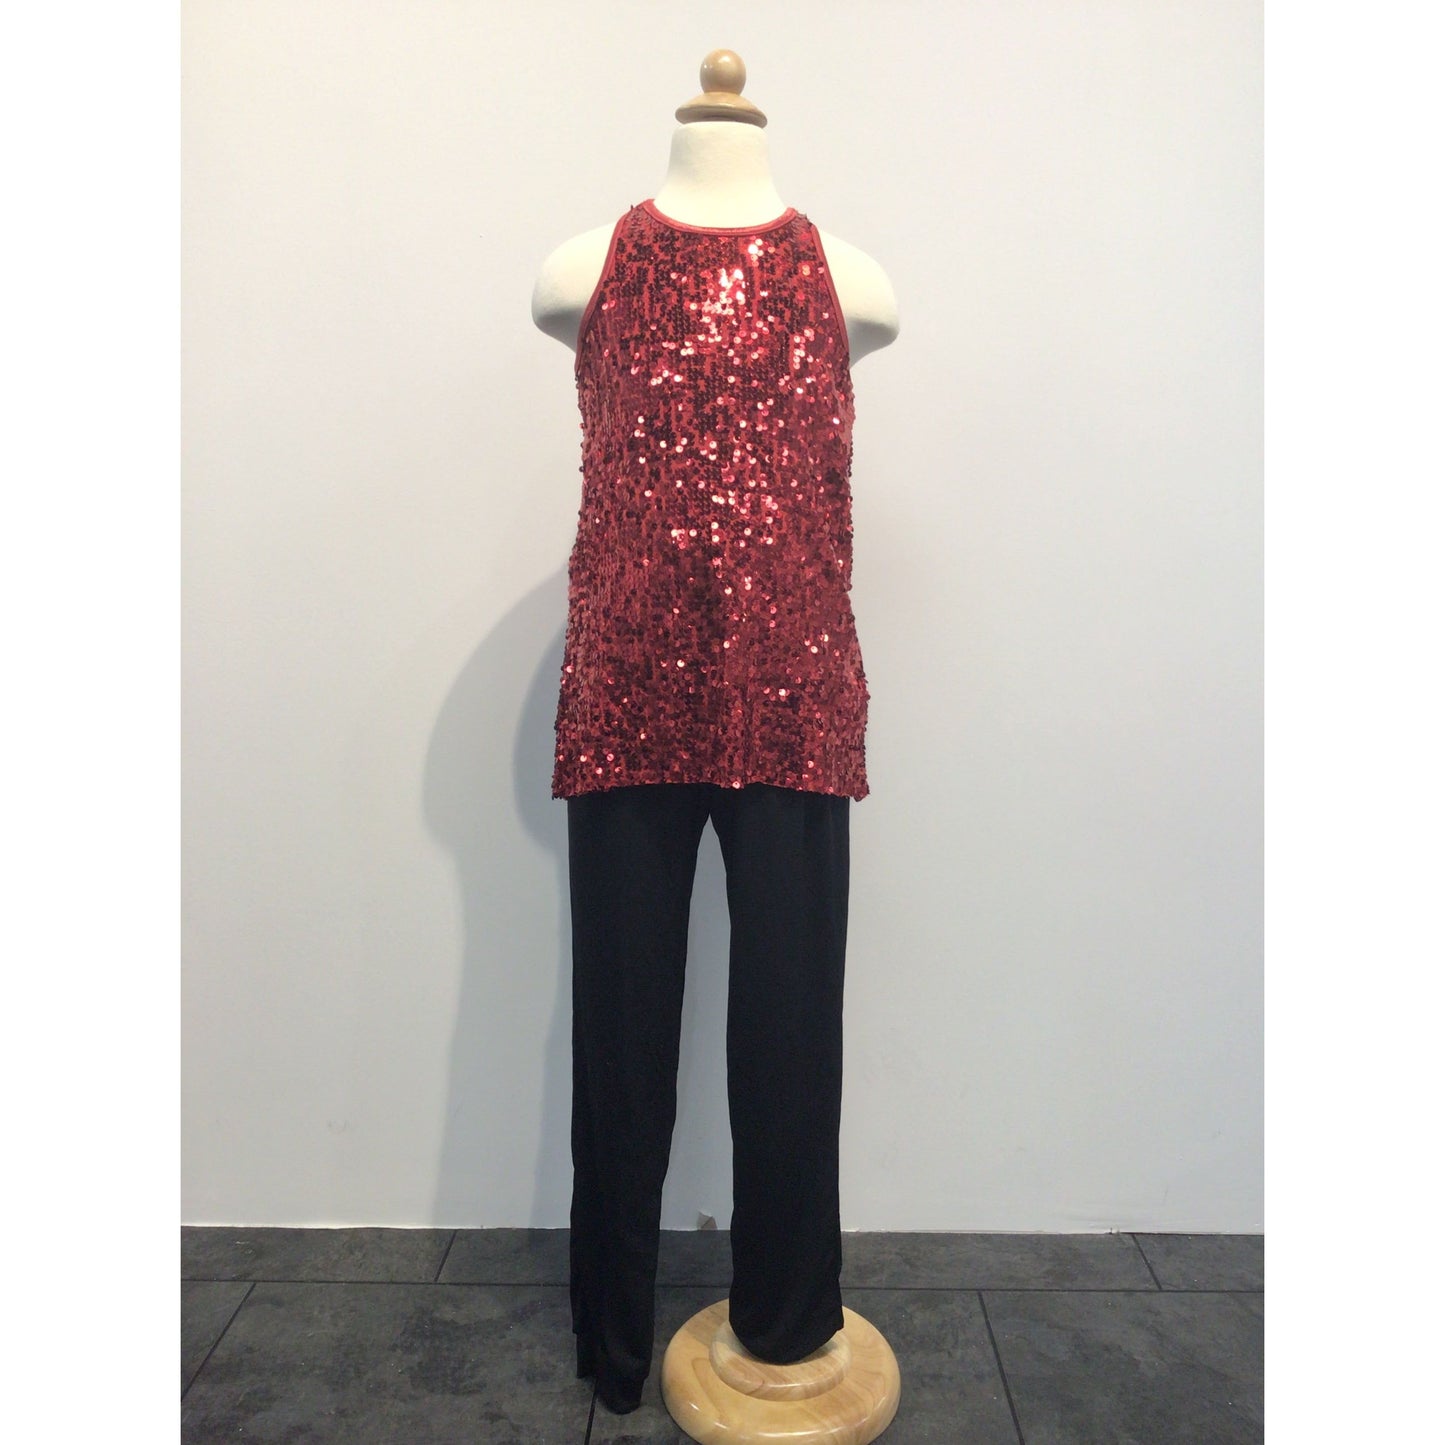 Jazz/Tap Red Sequin Top and Black Pants with Red Gloves